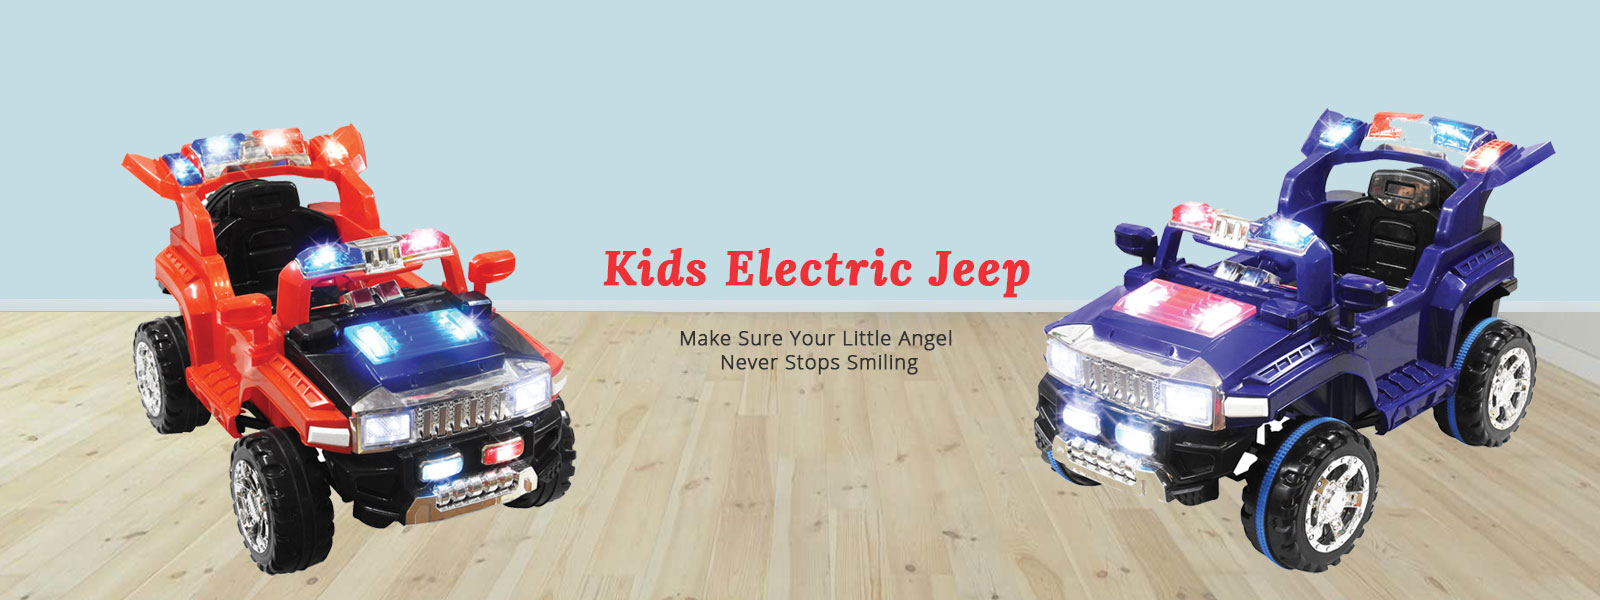 Kids Electric Jeep Manufacturers in Jhansi